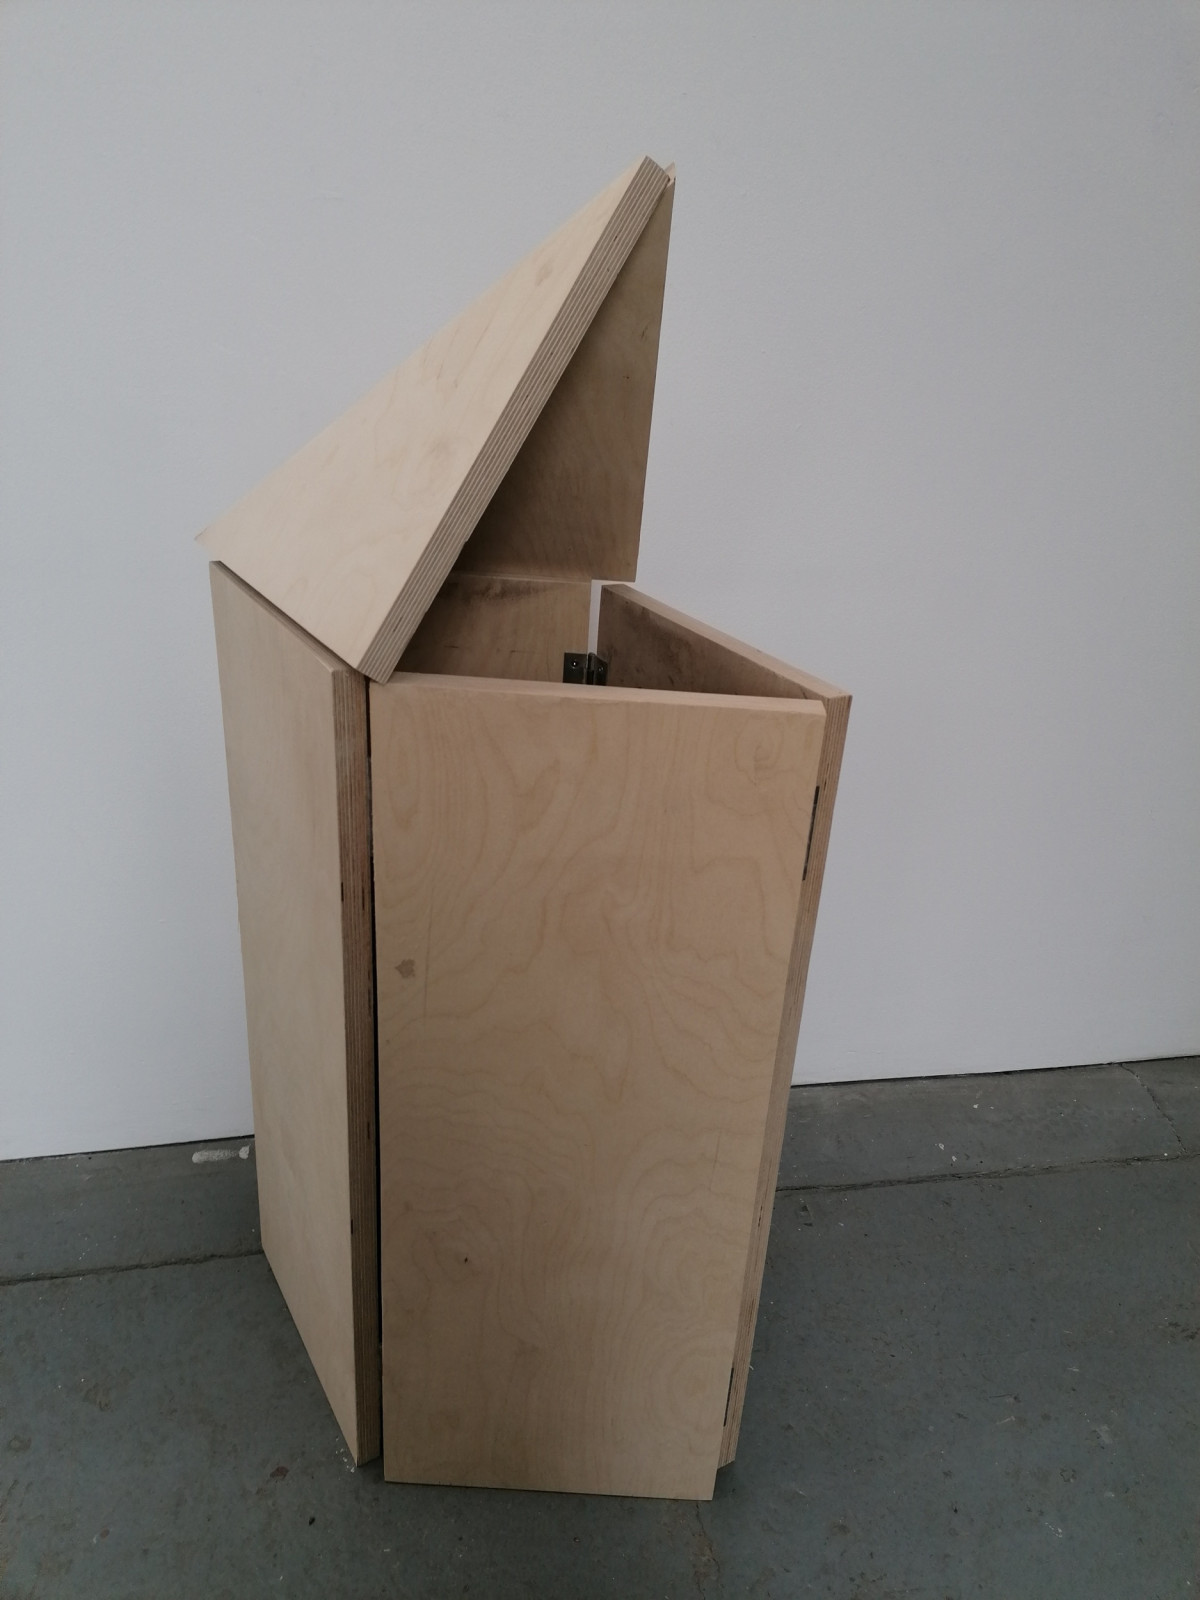 Folding plinth as part of the 'The Origami of Being' performance